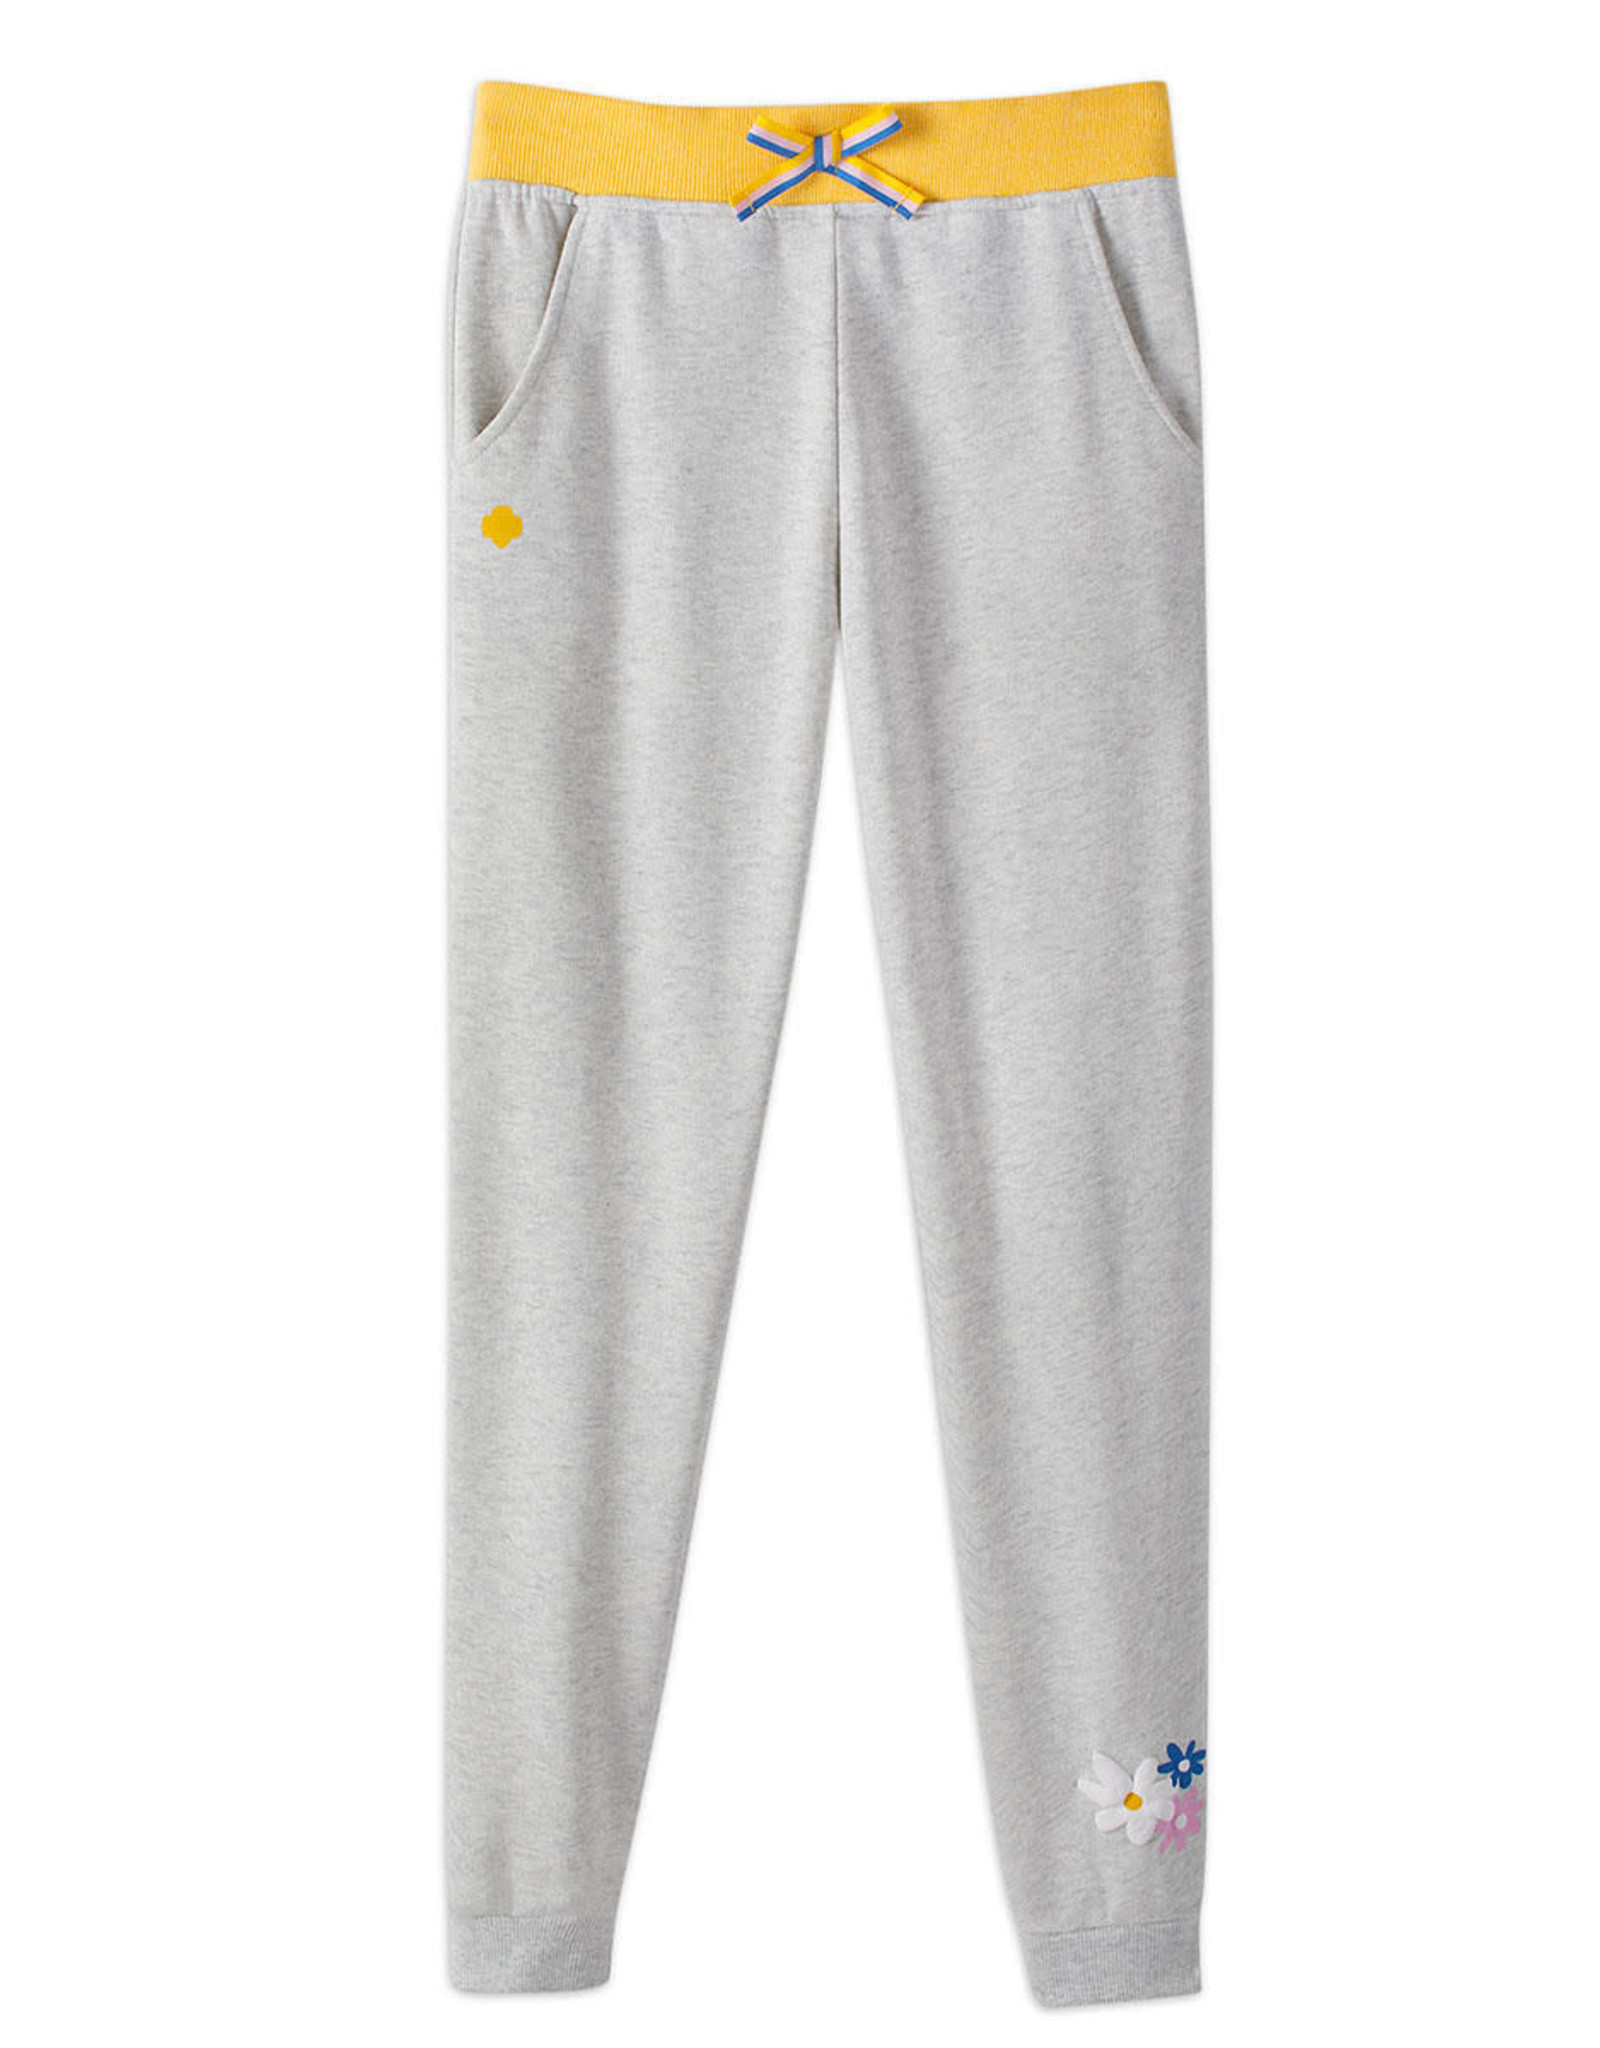 GIRL SCOUTS OF THE USA Daisy Joggers